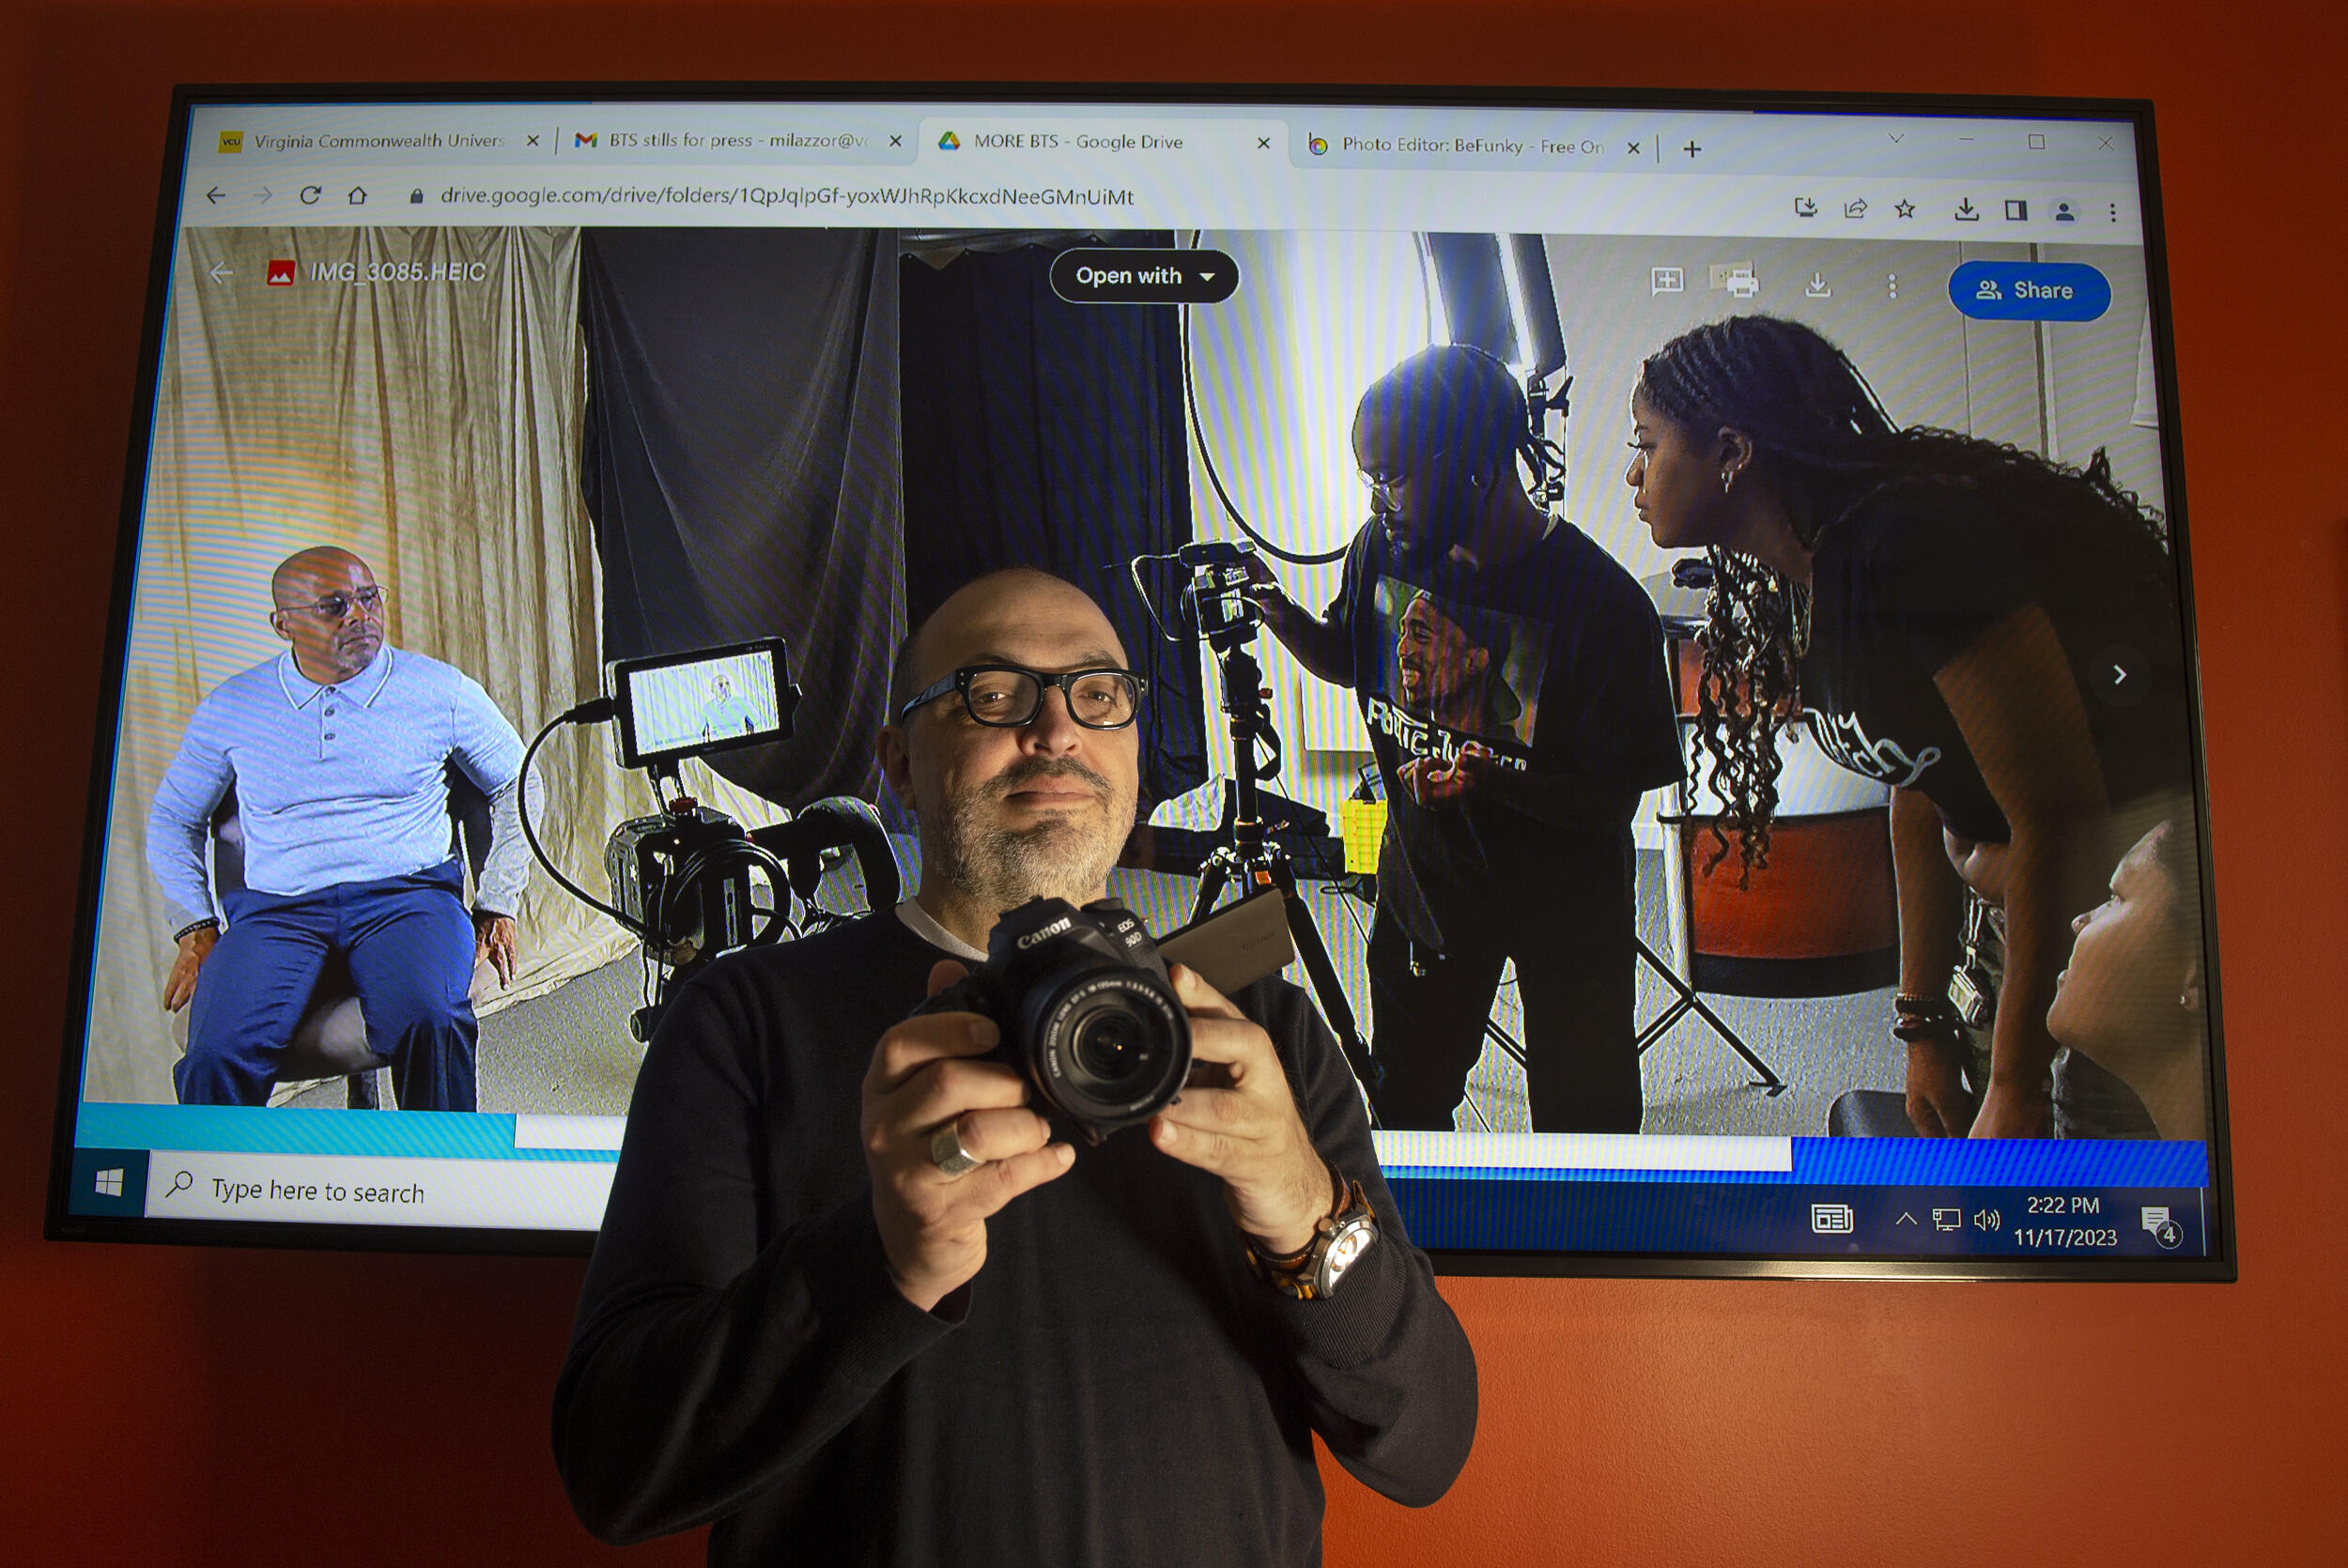 A photo of a man holding a video camera while standing in front of a large screen which shows two people filming another person on a set. 